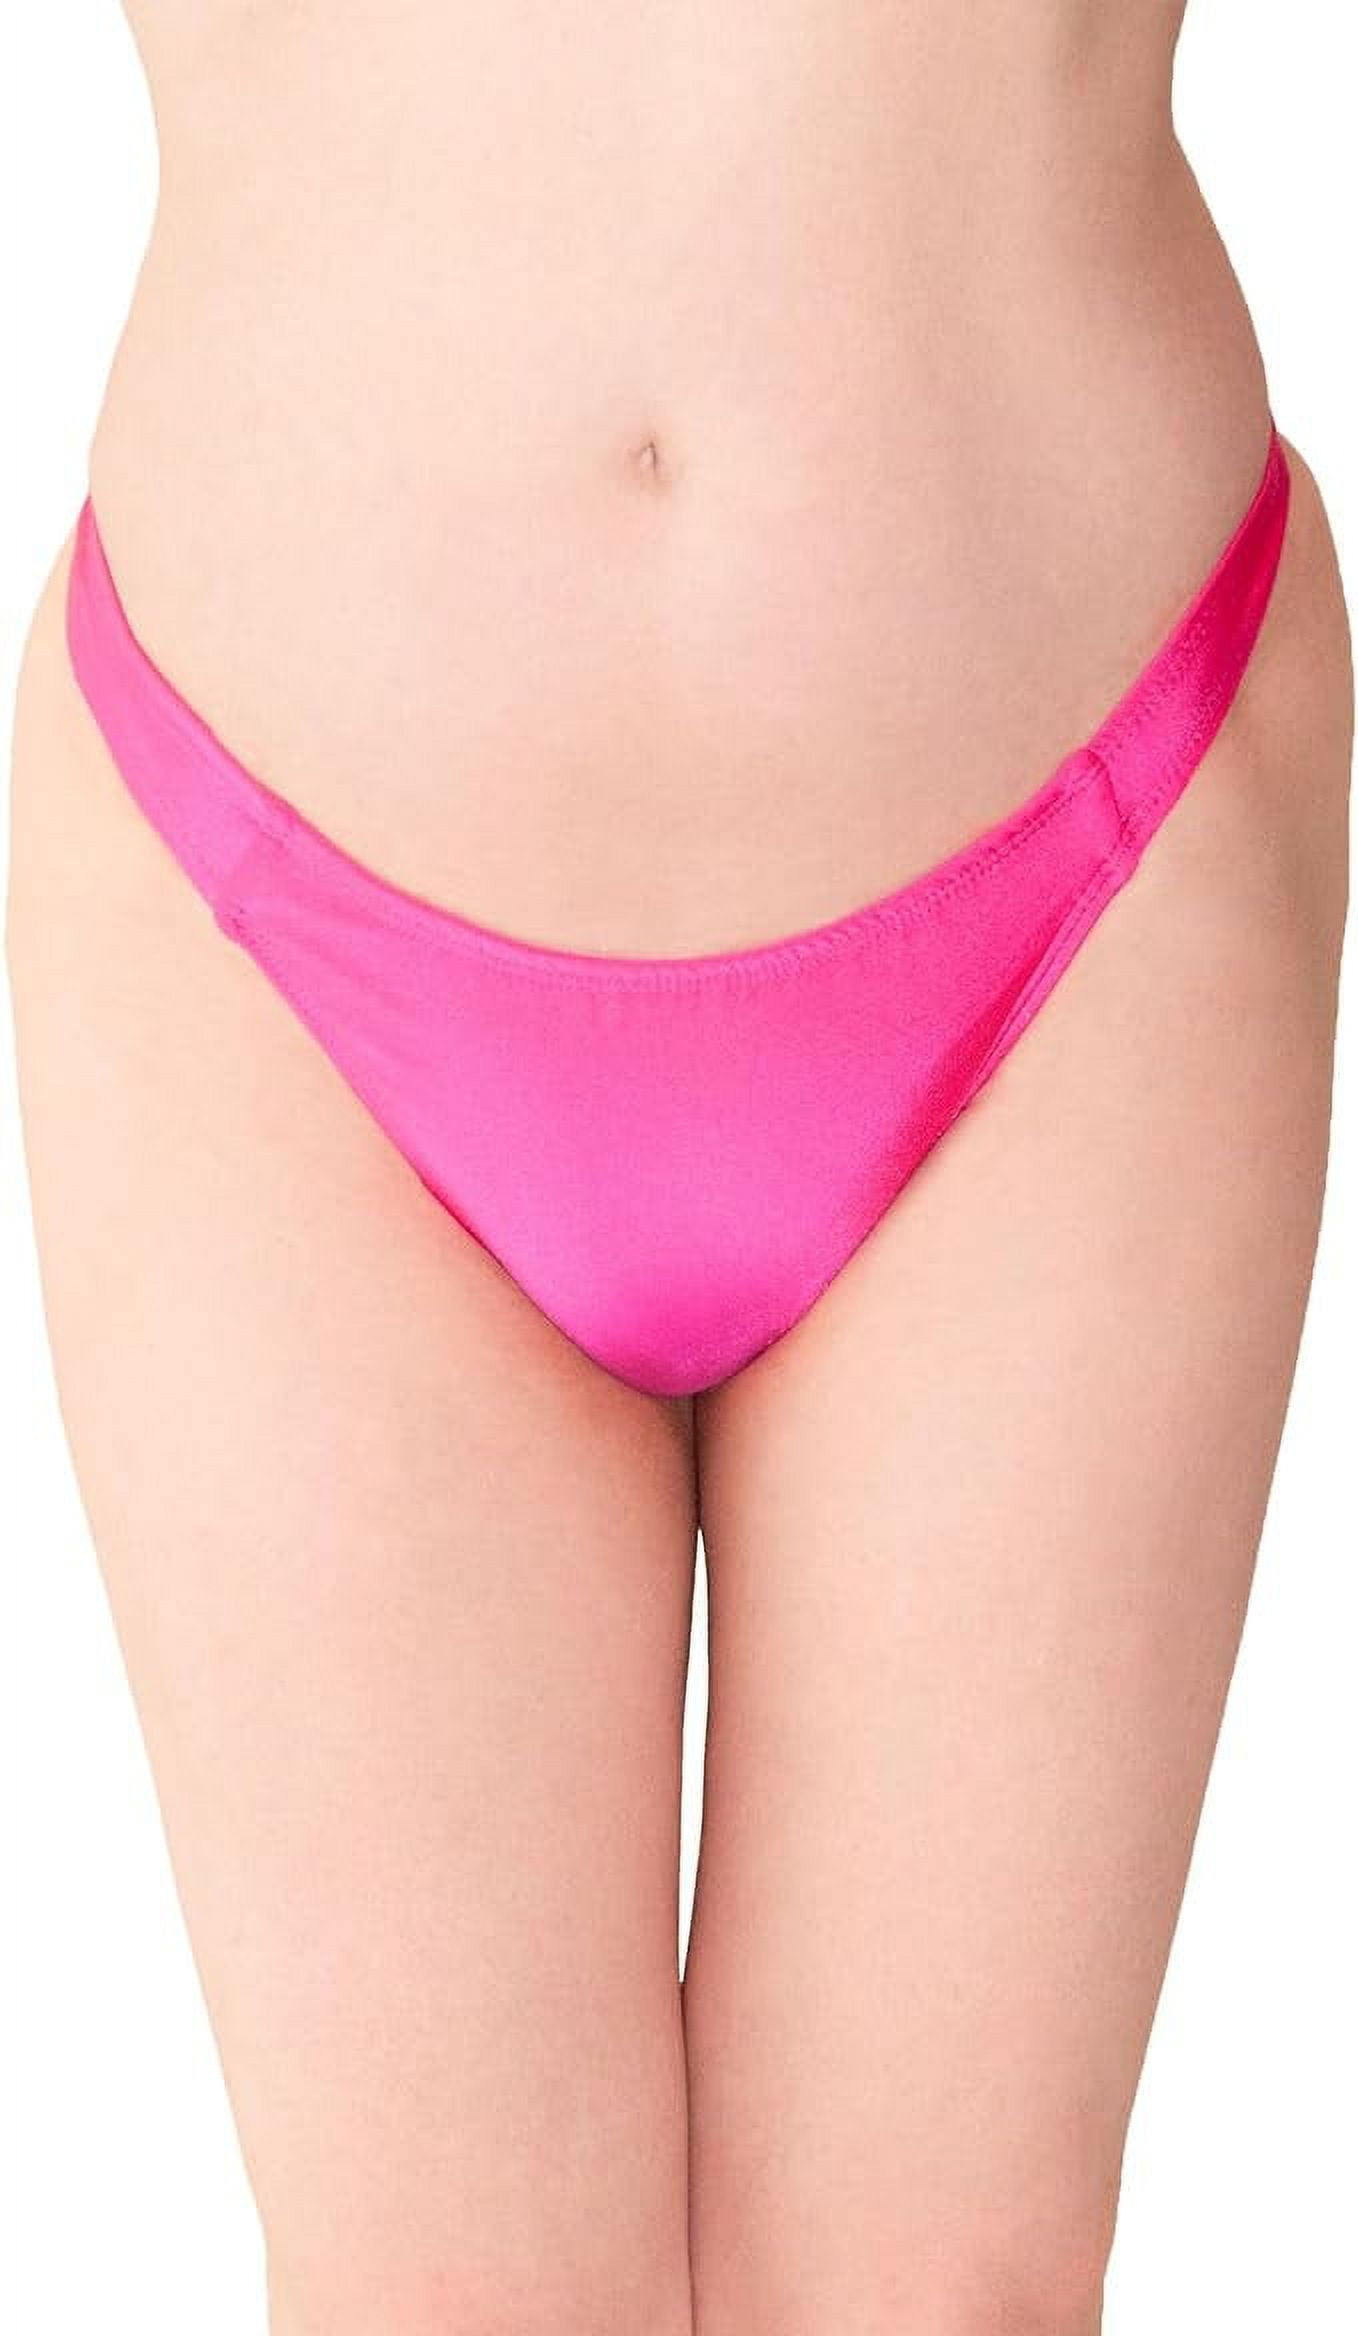 Glamour Boutique's Gaff Thong Underwear Male-to-Female Tucking Panties  (X-Small, Pink) 